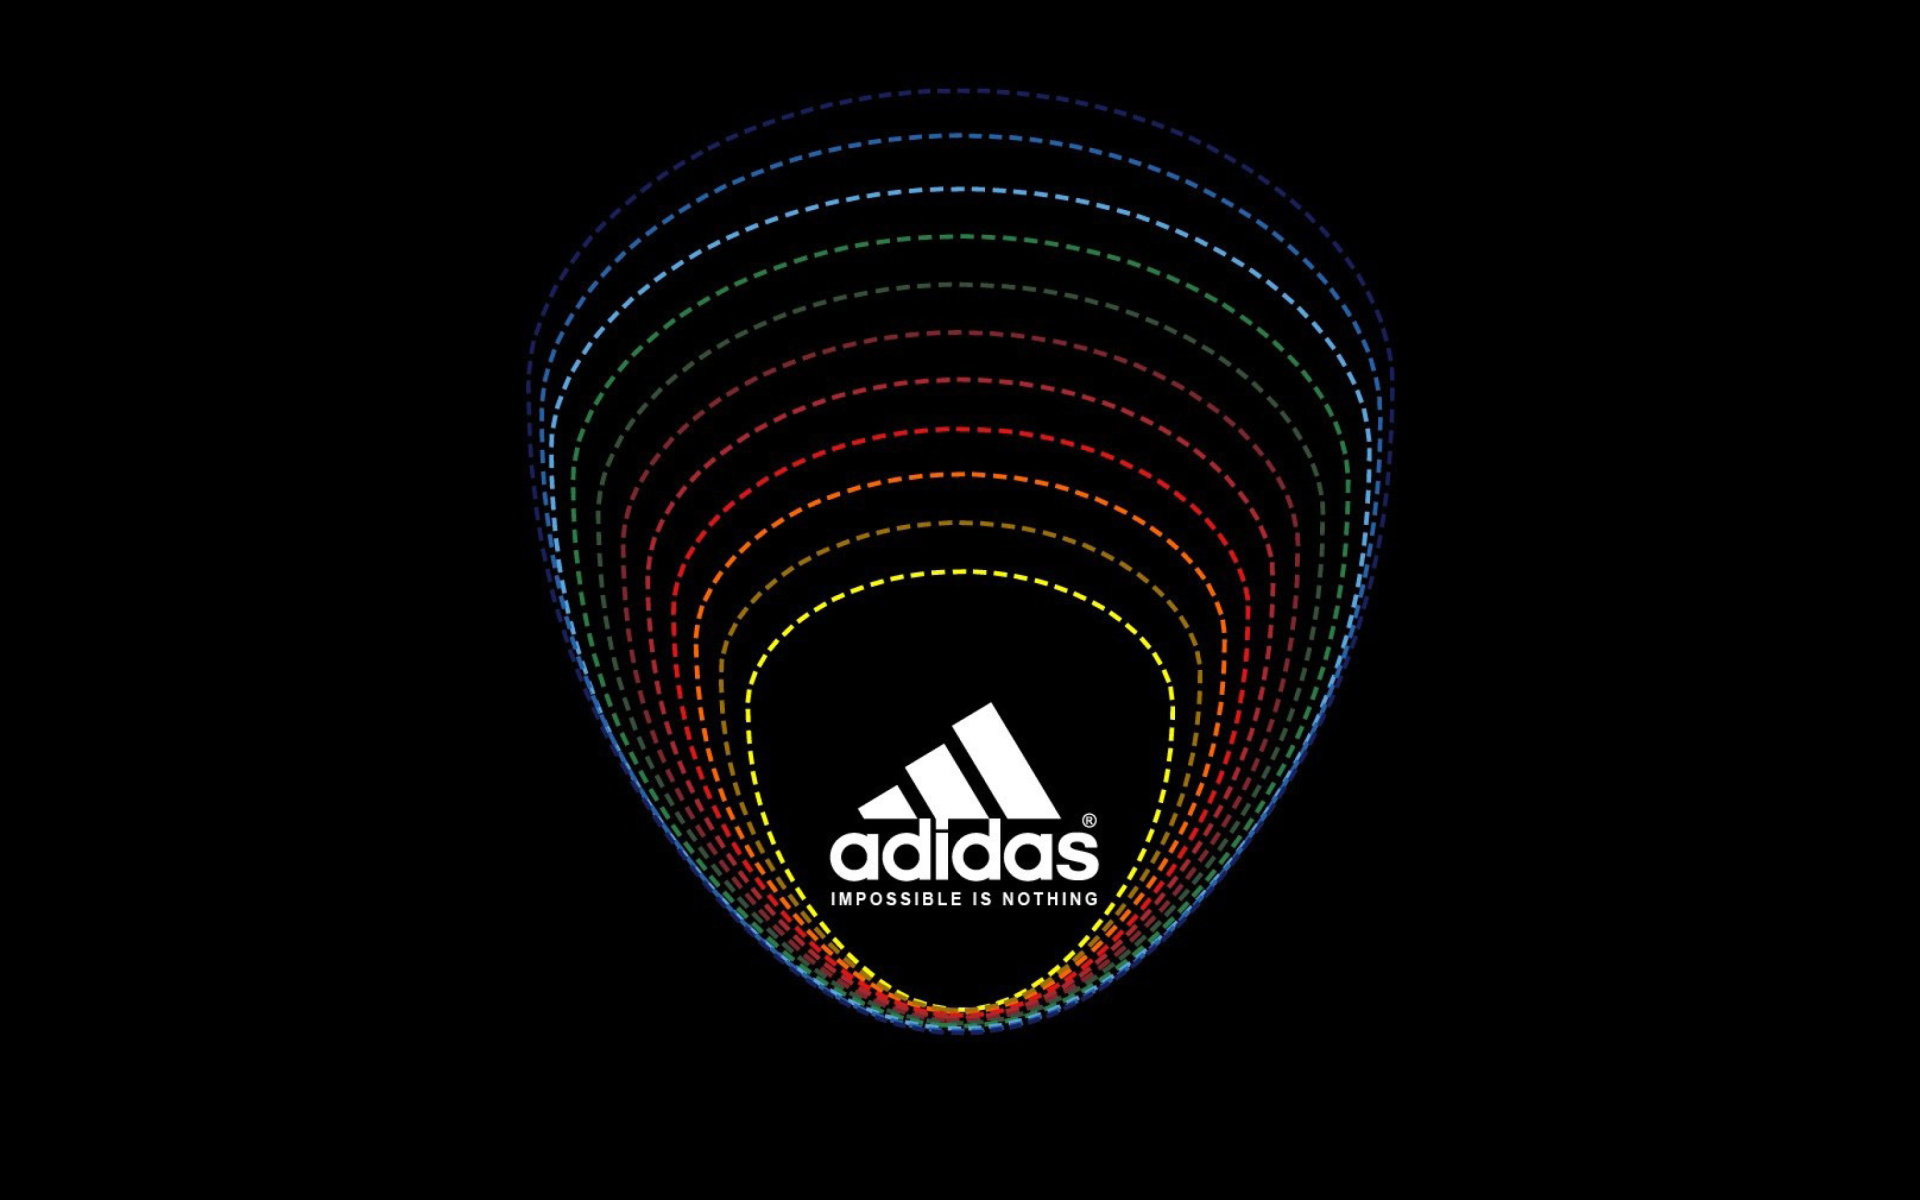 Обои Adidas Tagline, Impossible is Nothing 1920x1200